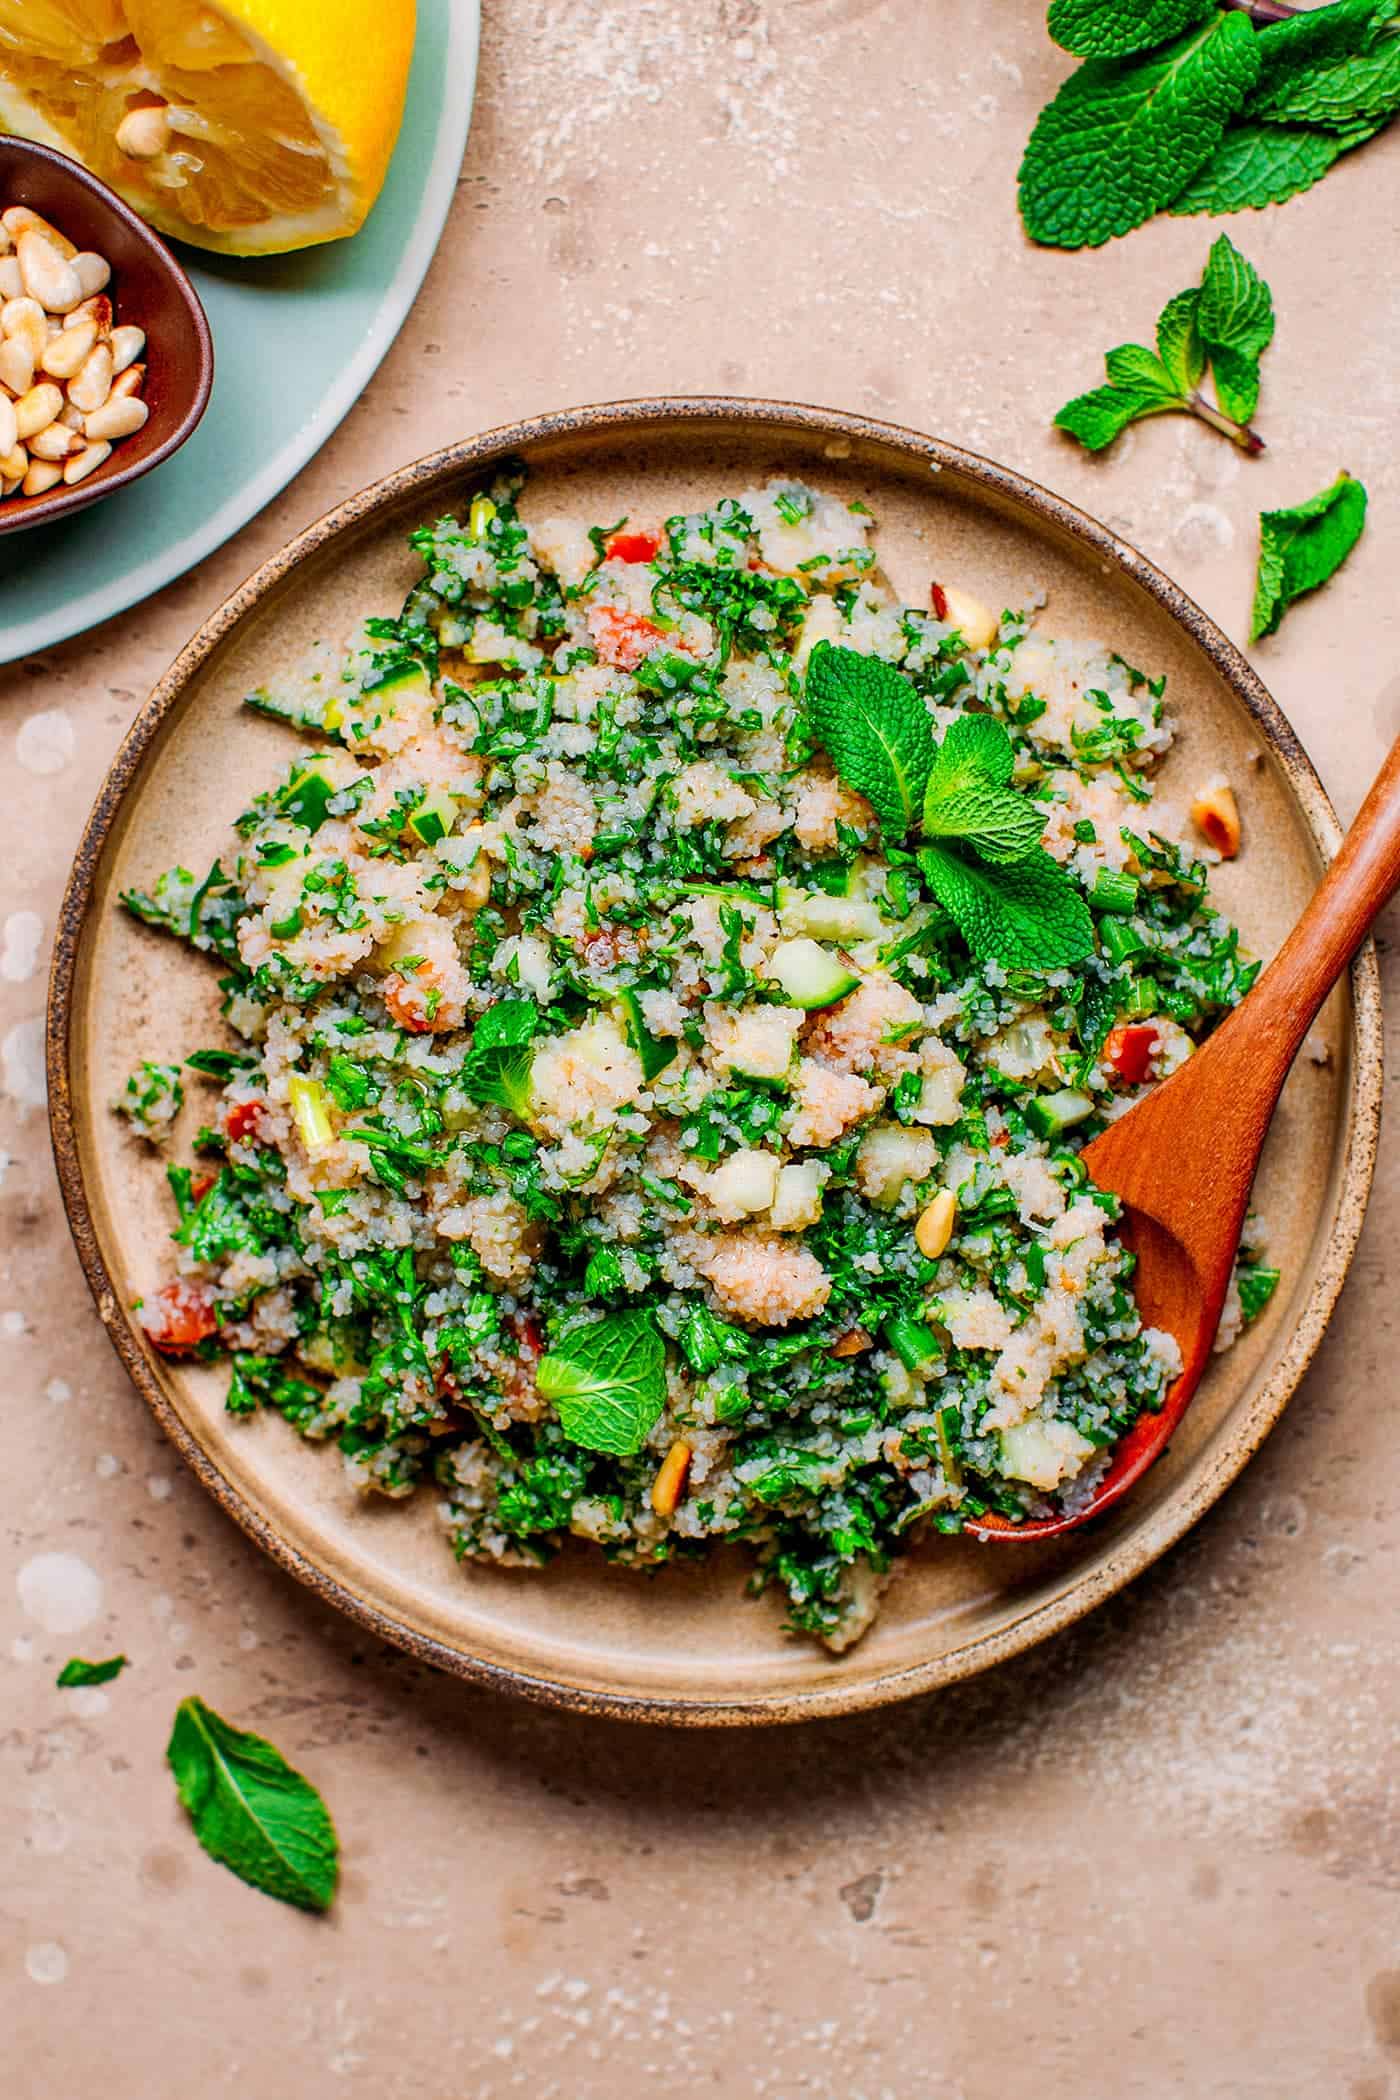 Fonio tabbouleh with fresh herbs on a plate.